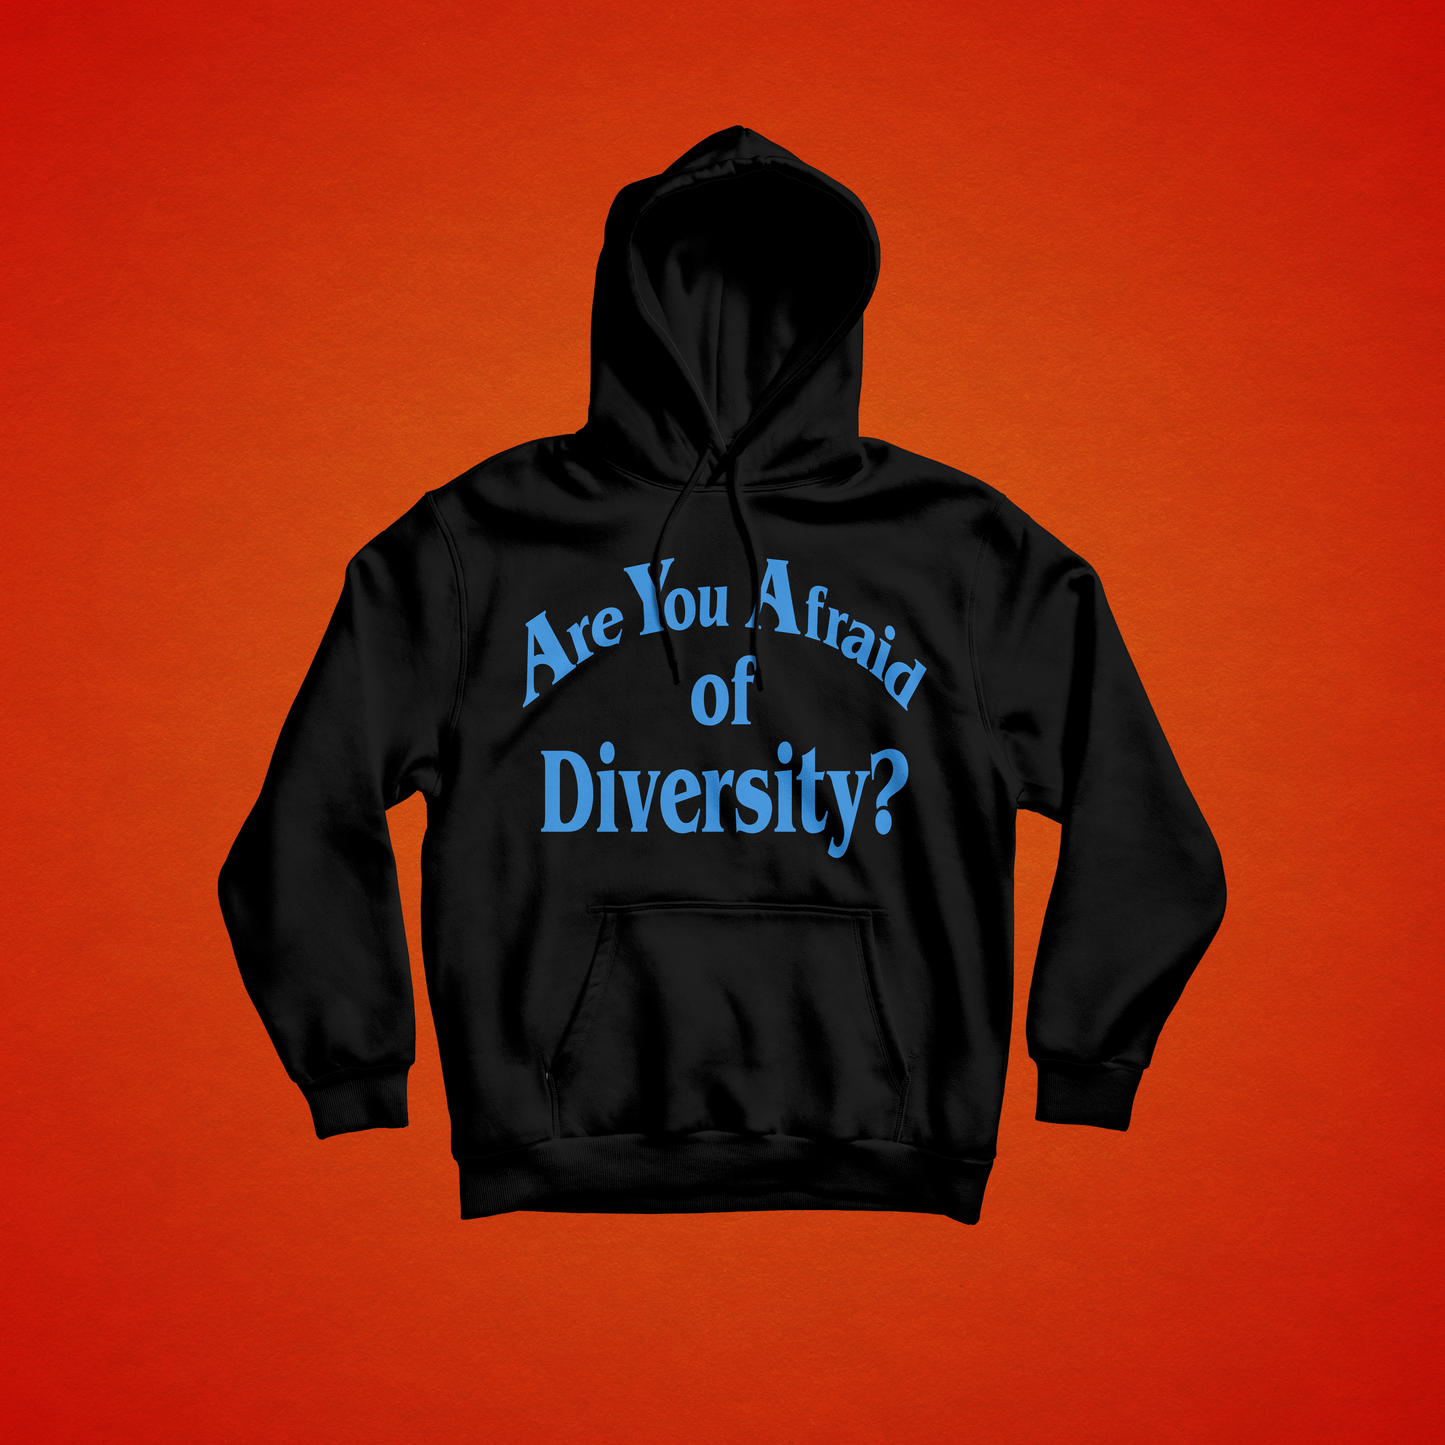 Are You Afraid of Diversity hoodie - Brownie Points for You